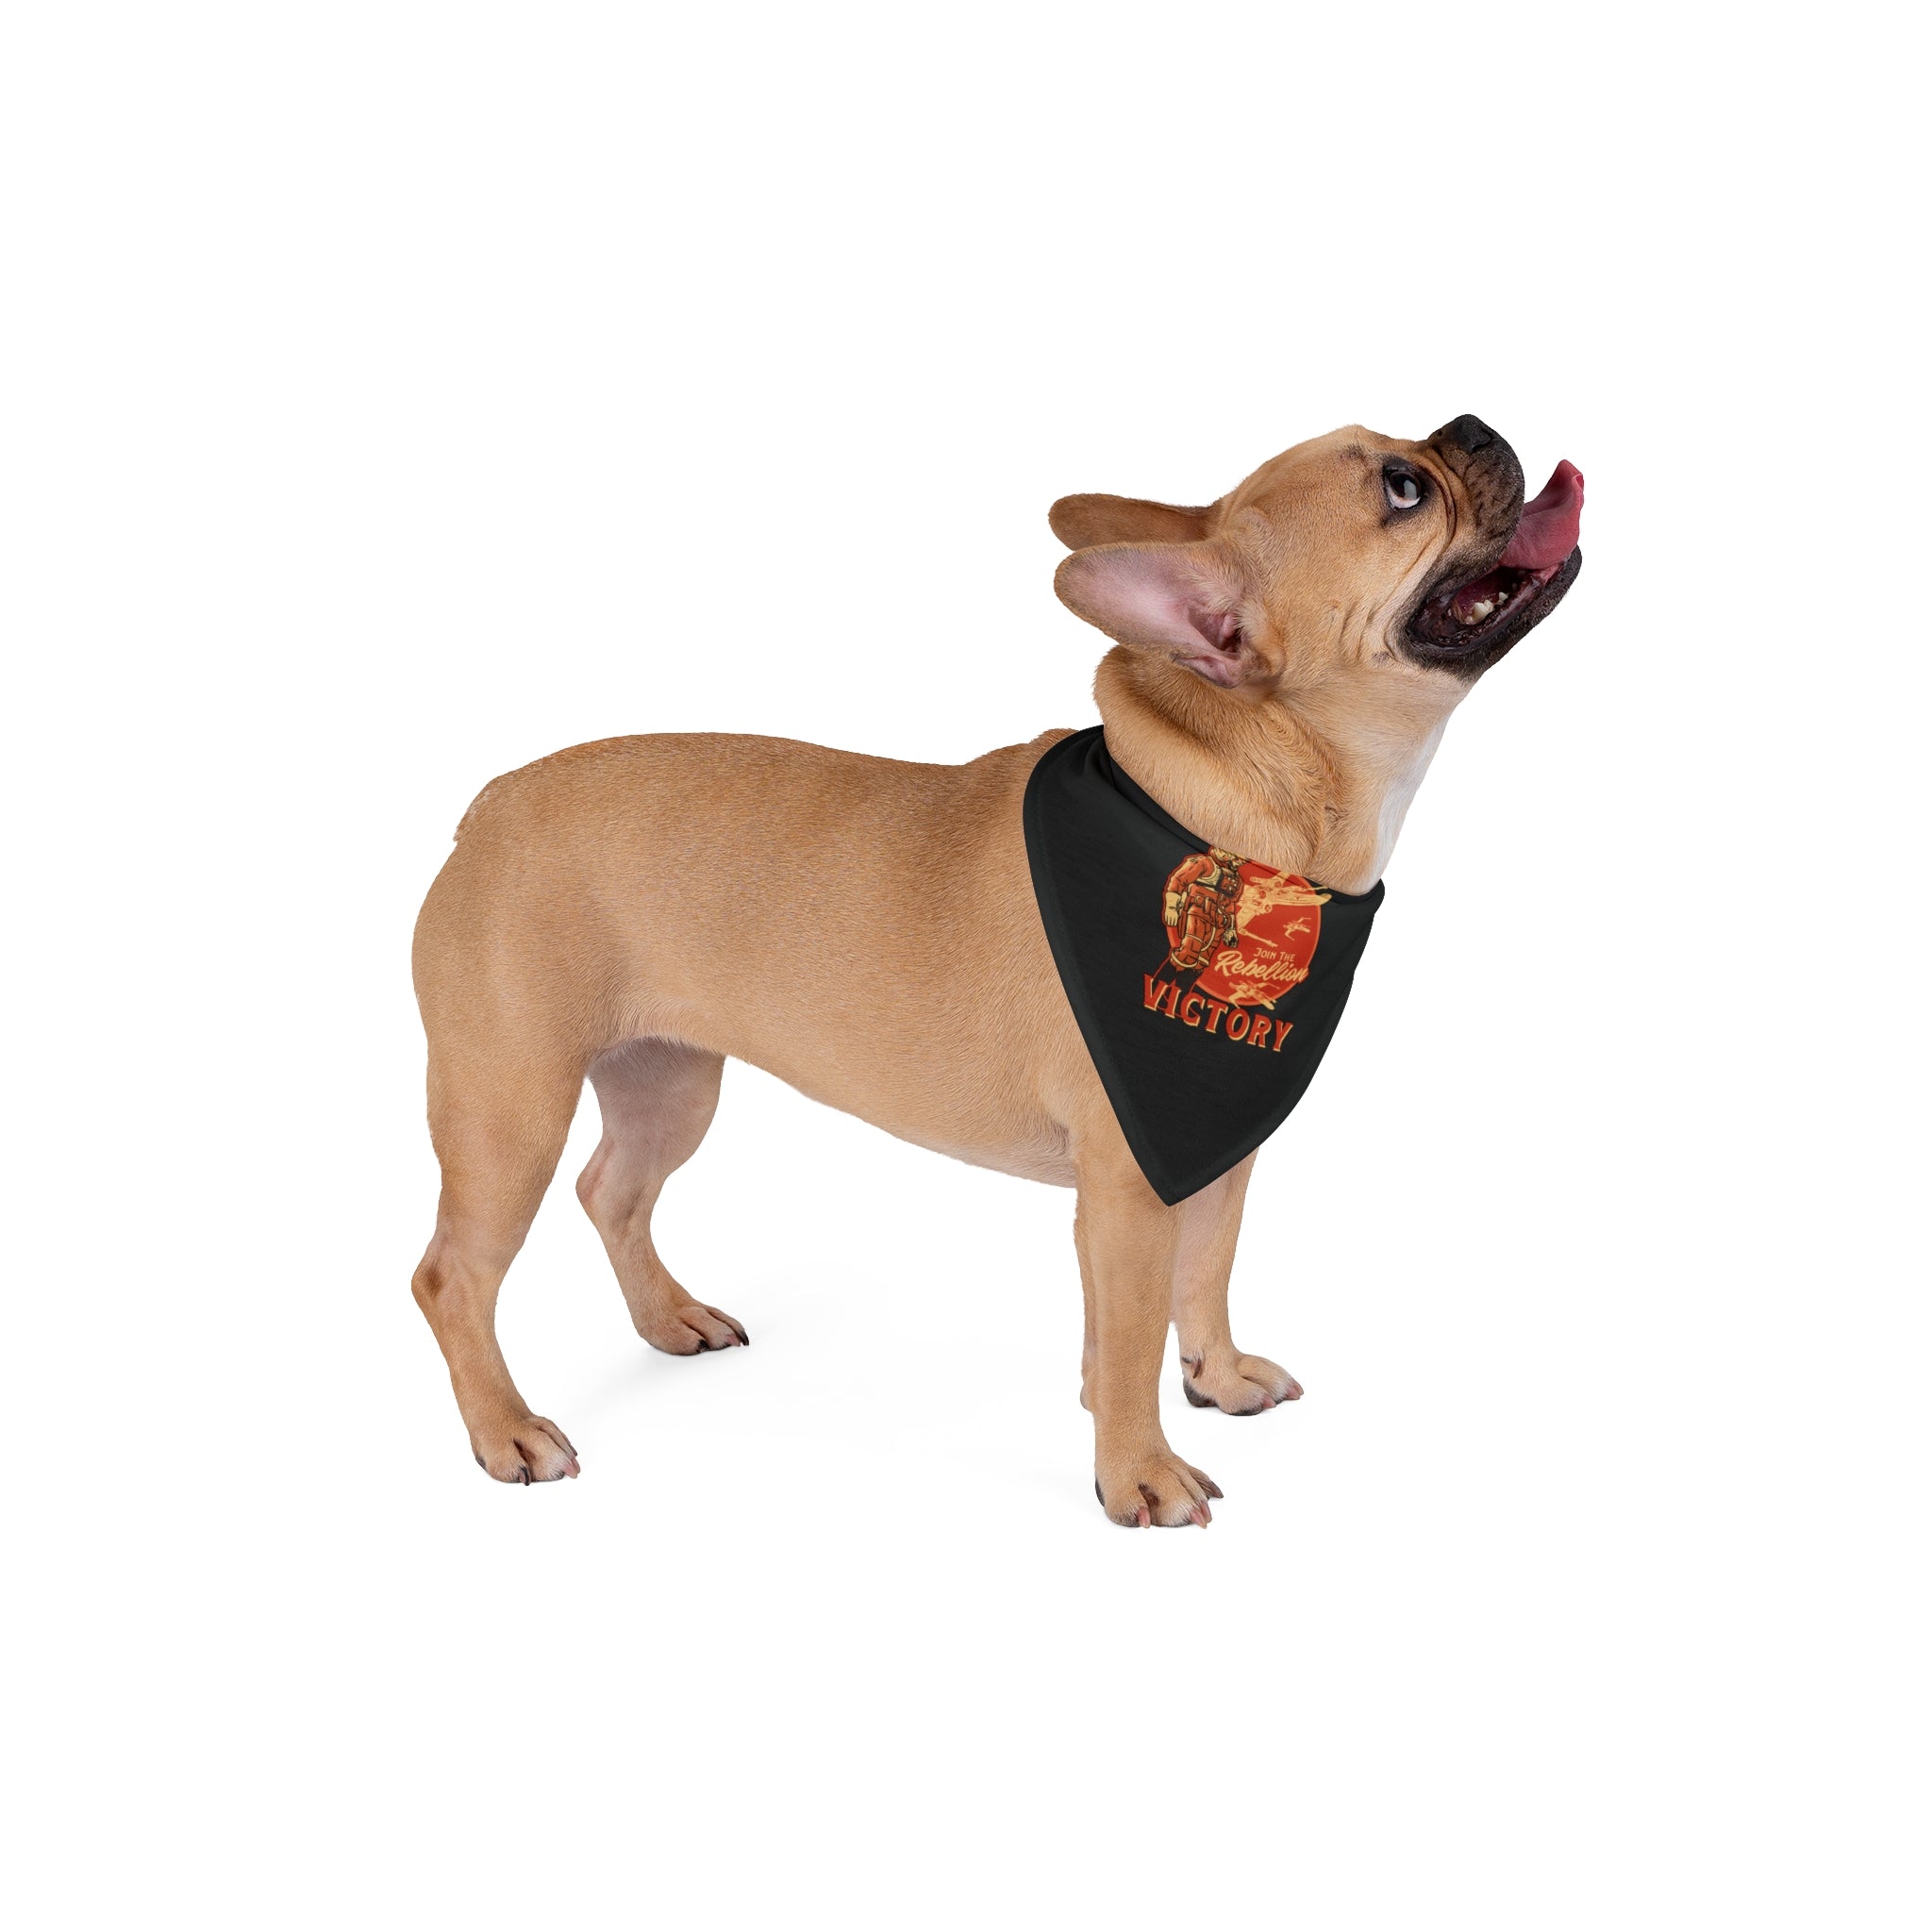 A tan French Bulldog stands wearing a black Wings of Victory - Pet Bandana made of soft-spun polyester, featuring a design with a lion's head and the word "Victory." The dog is looking upwards with its mouth open, enjoying the comfort for pets that the bandana provides.